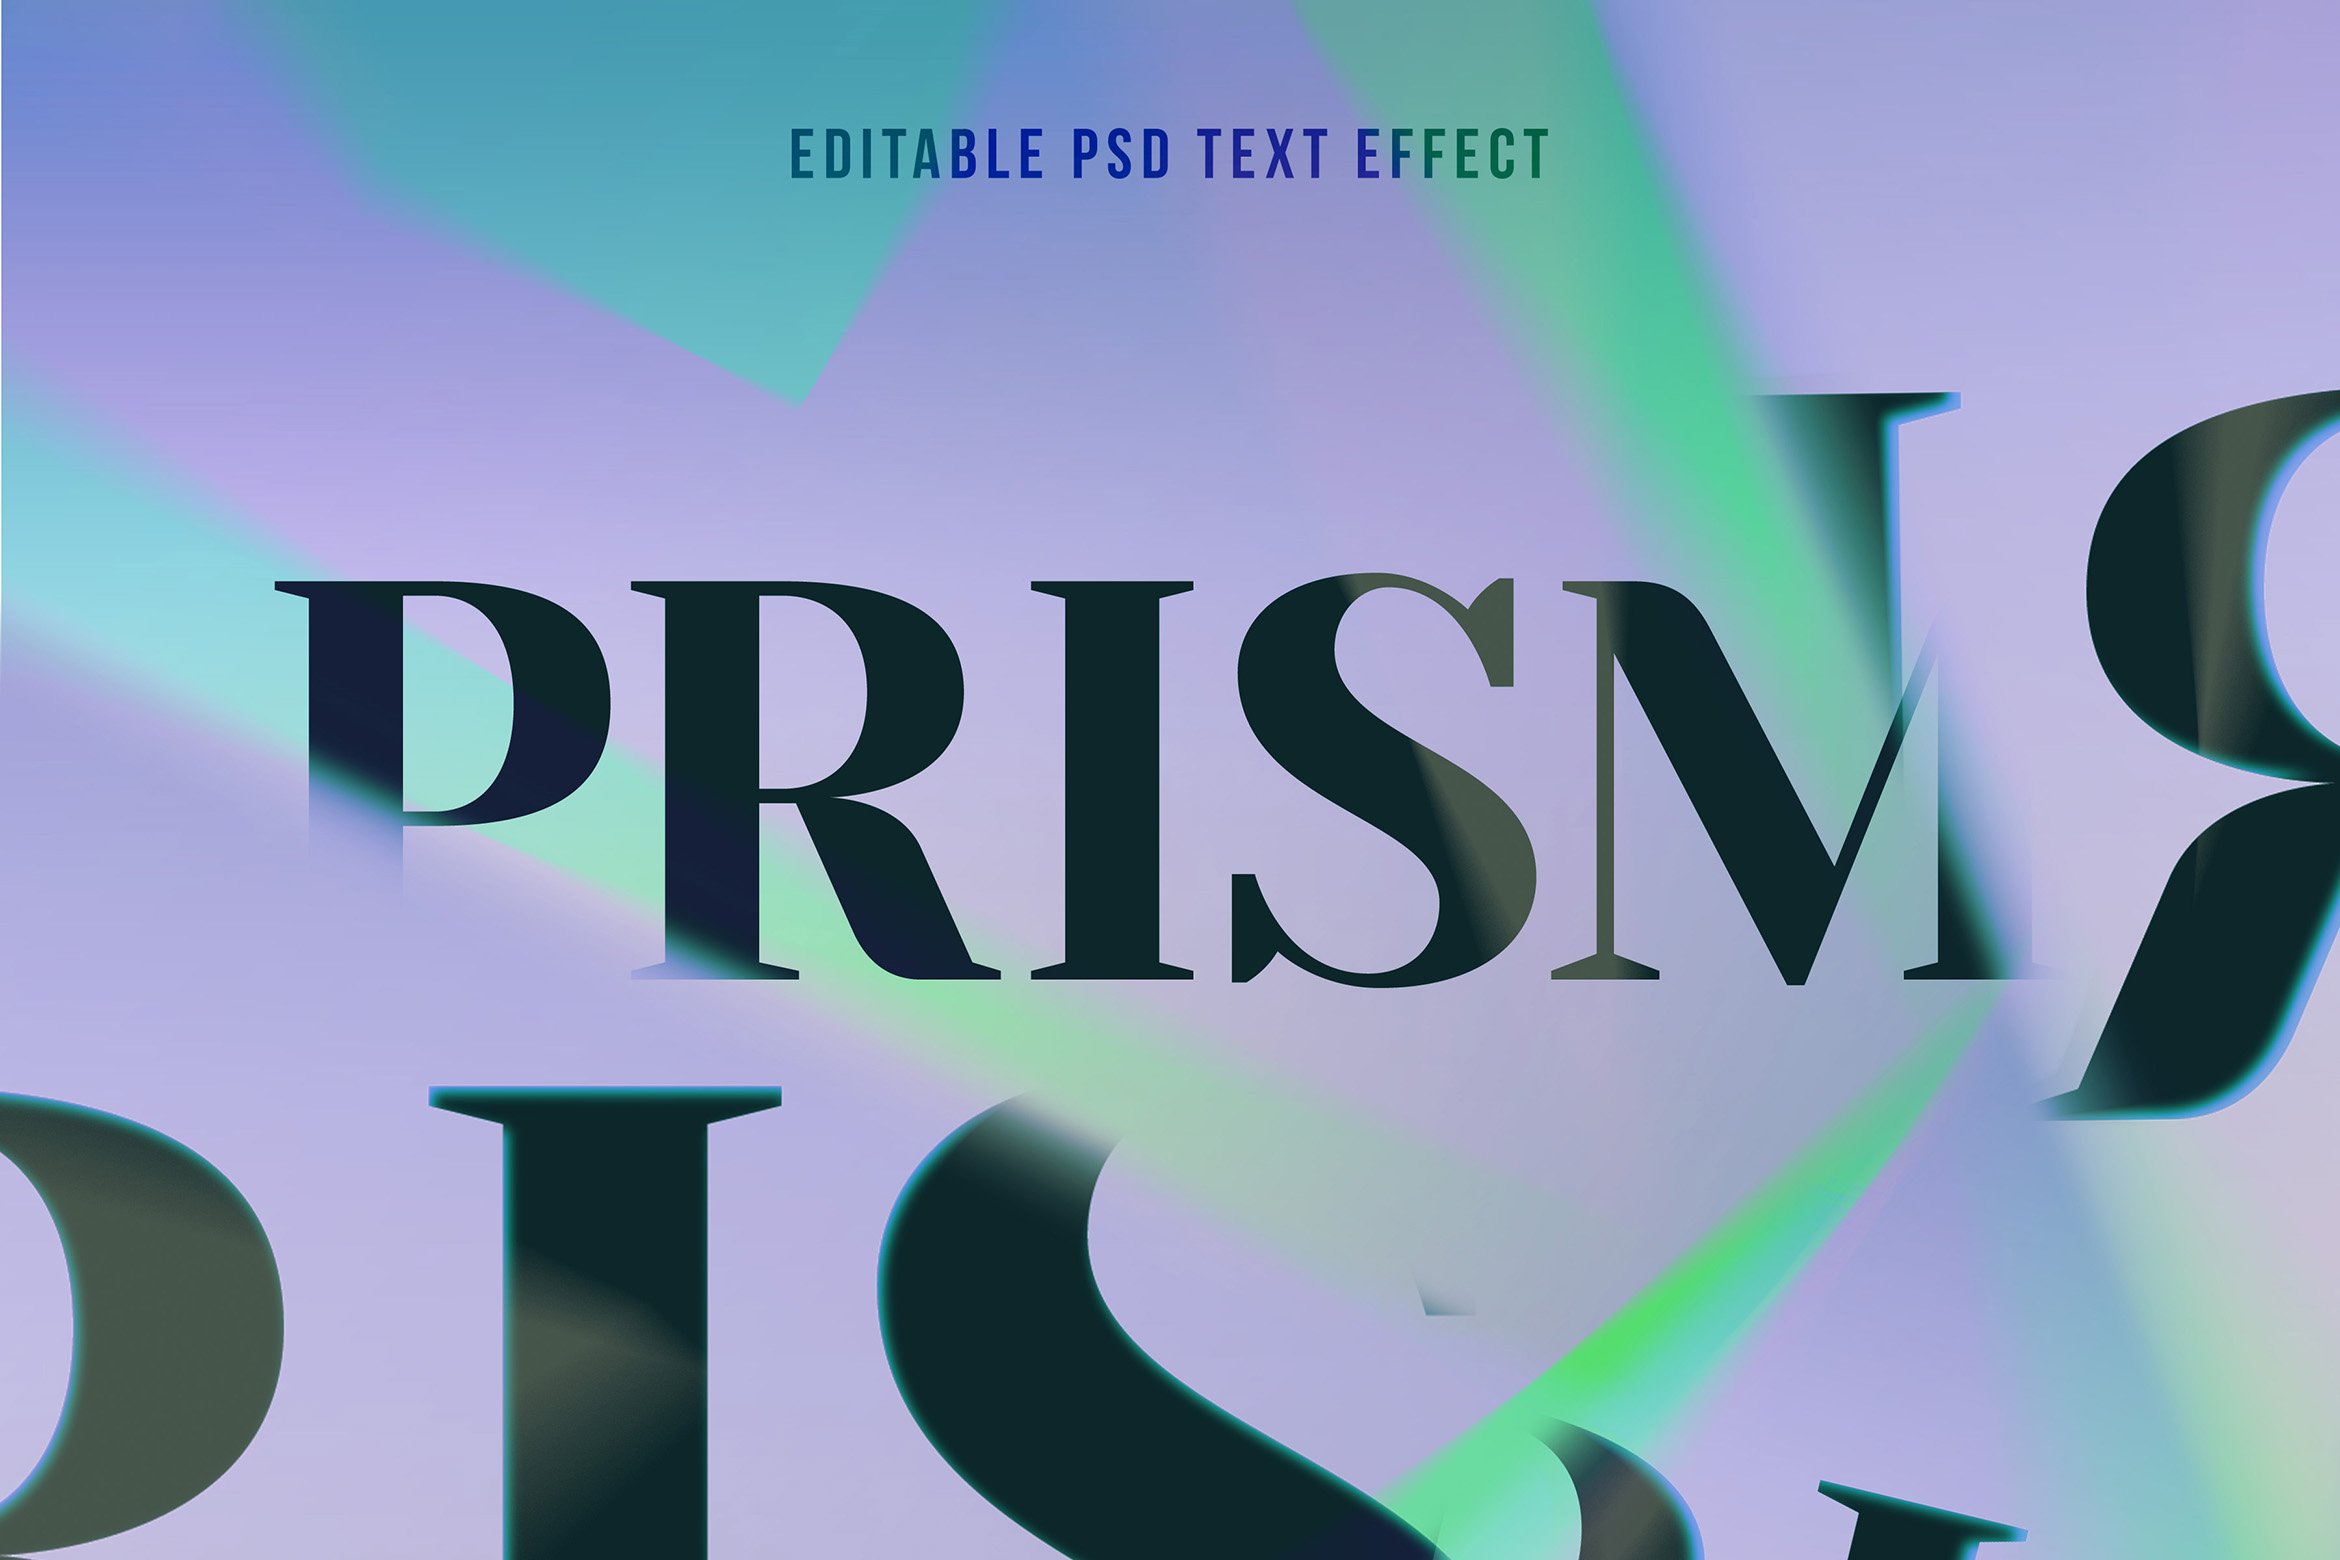 Prism Text Effectpreview image.